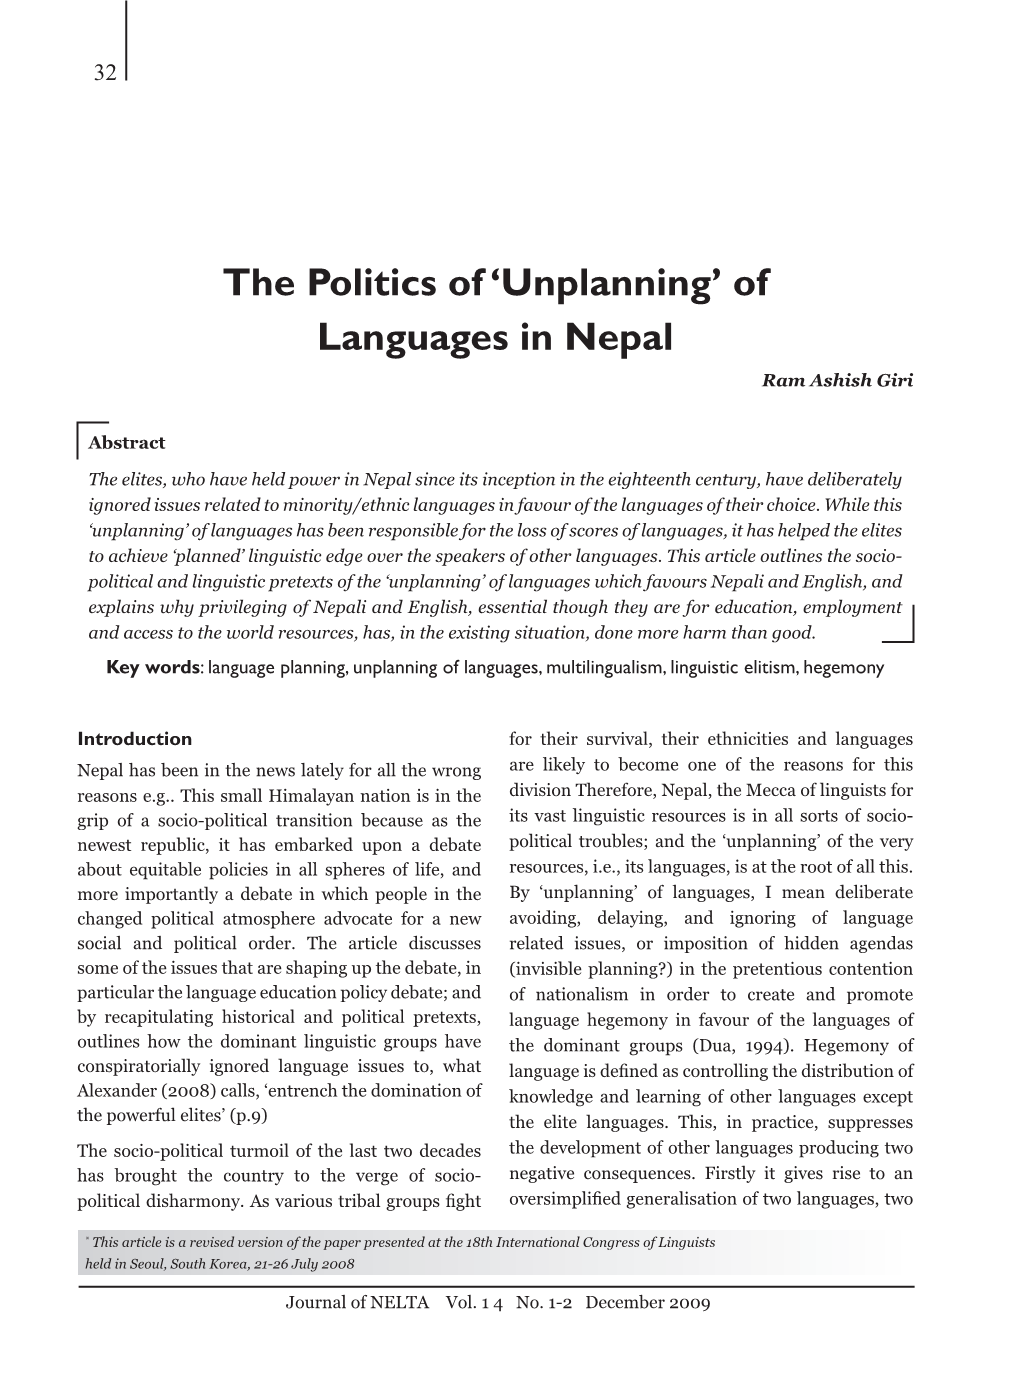 The Politics of 'Unplanning' of Languages in Nepal